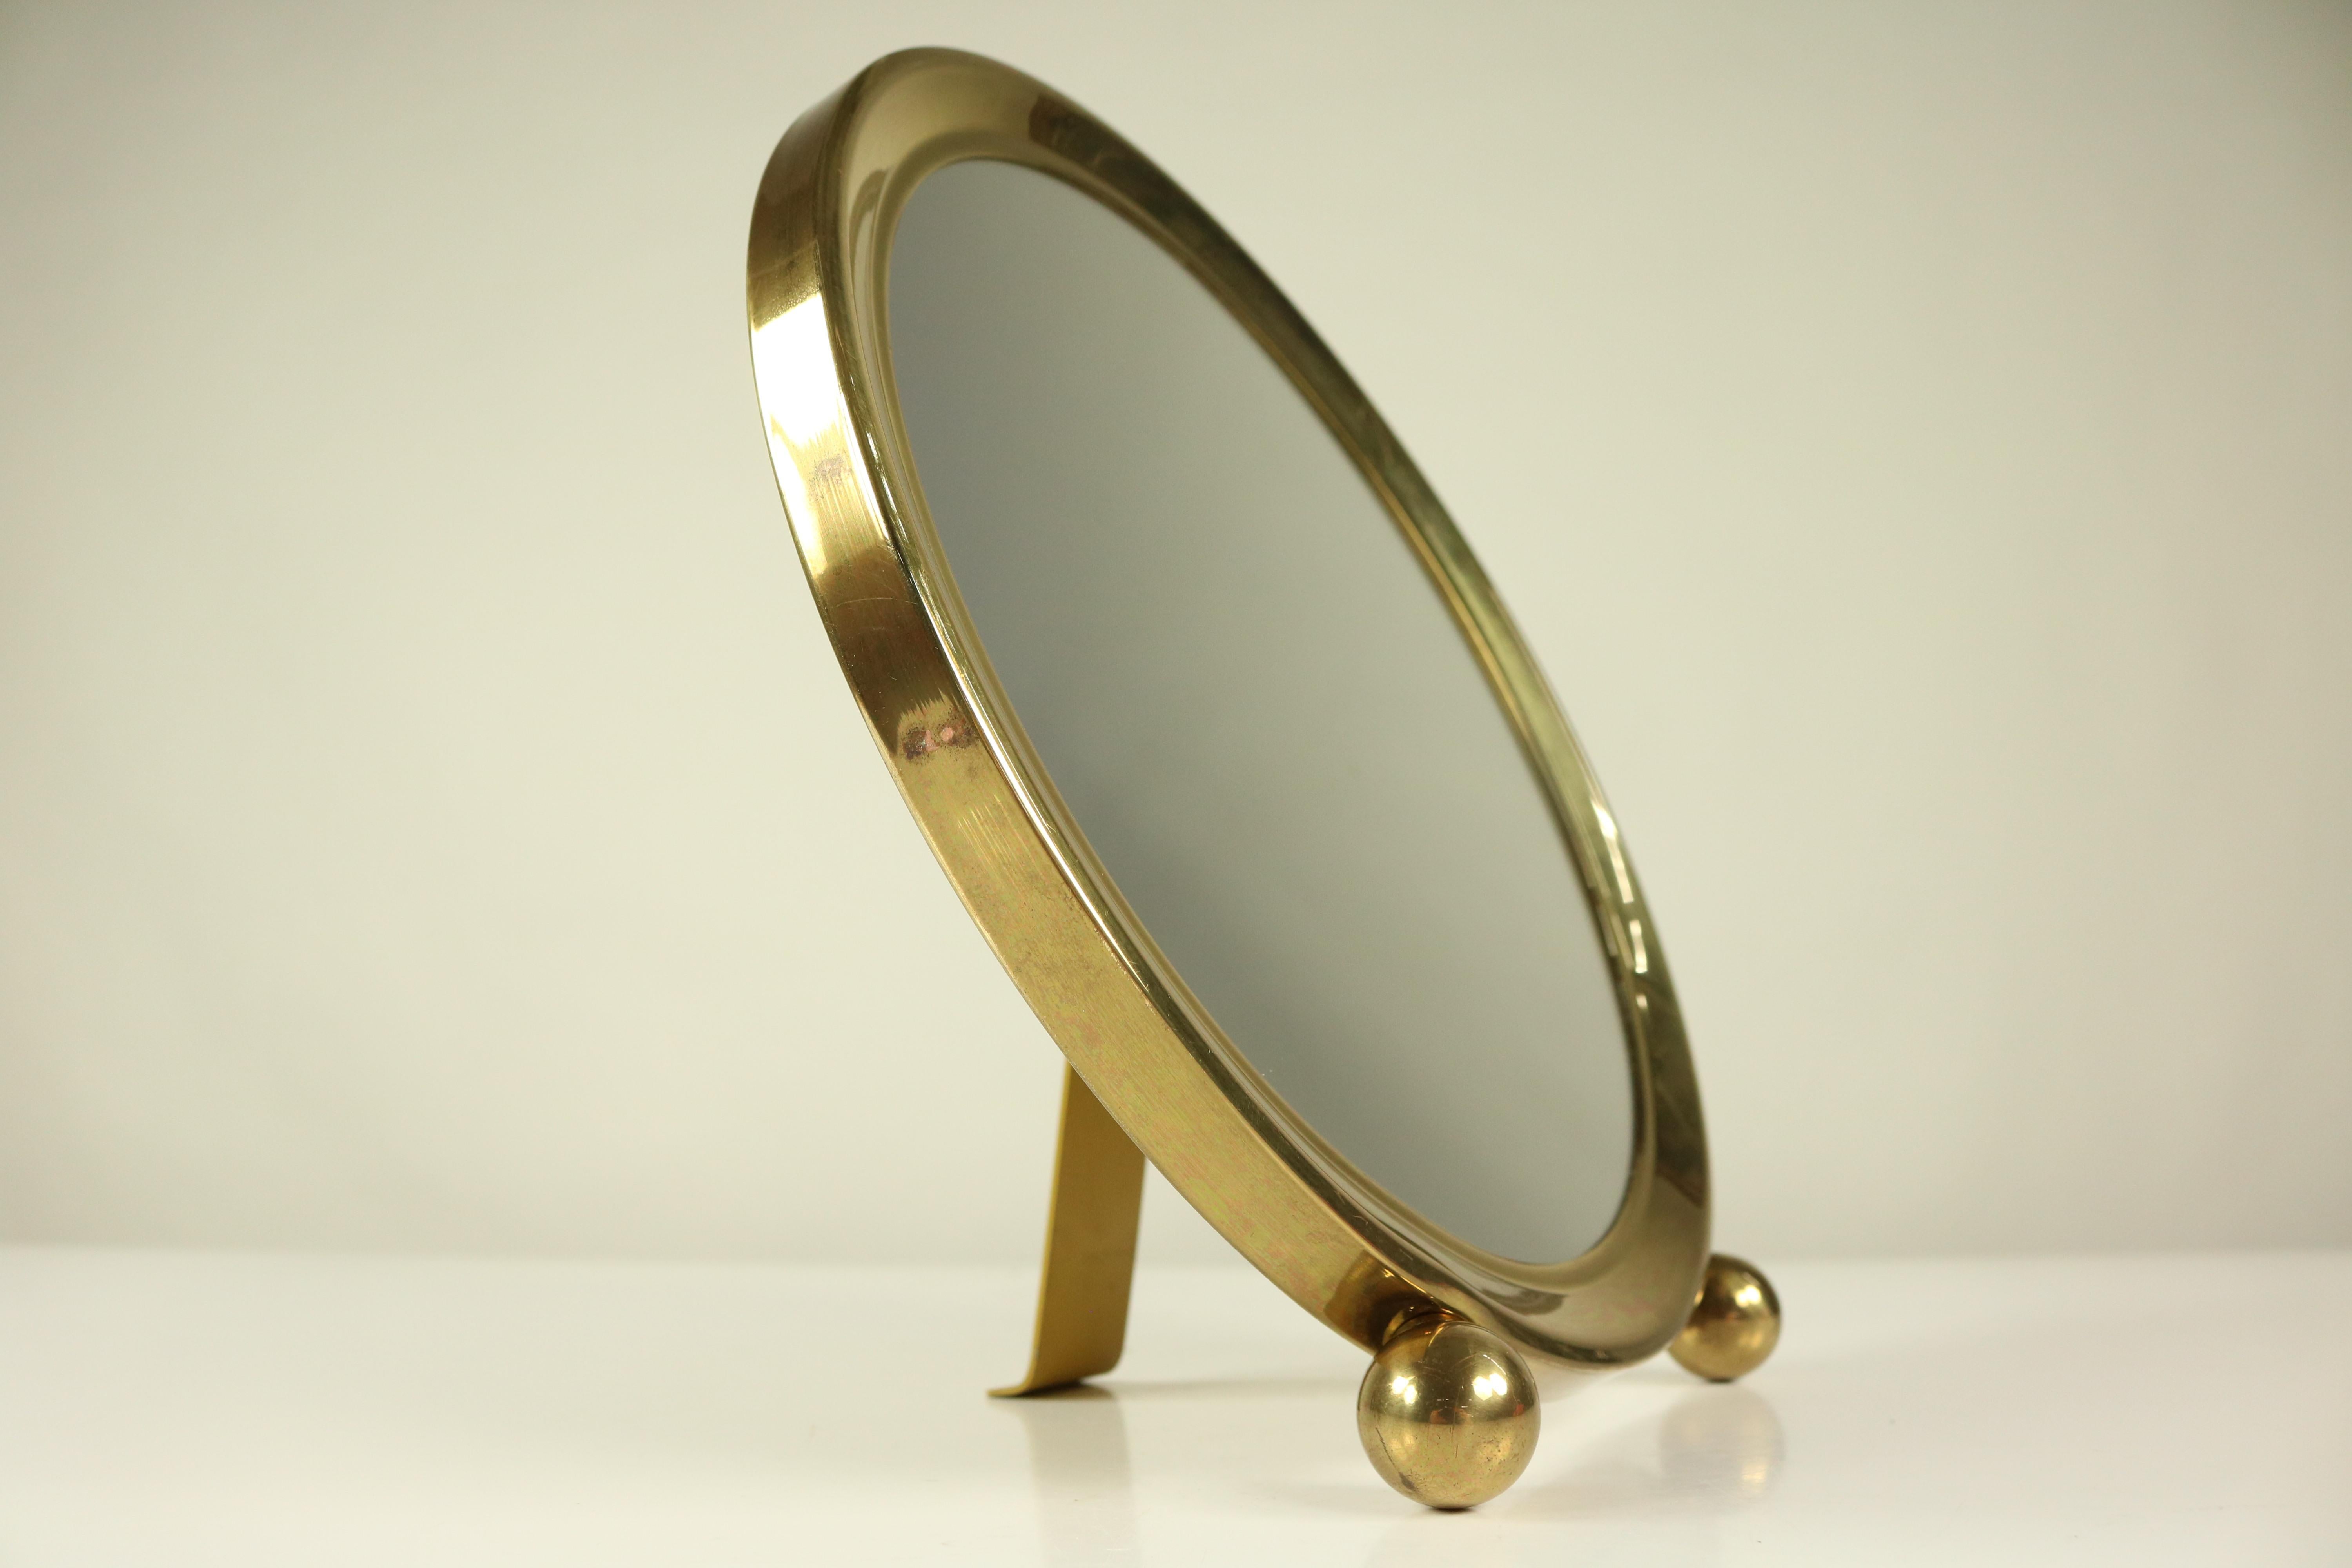 Art Deco wall and table mirror
in fine condition only a few light signs of usage and age
frame and ball feet are made of brass
Measures: Diameter 10 1/2''.